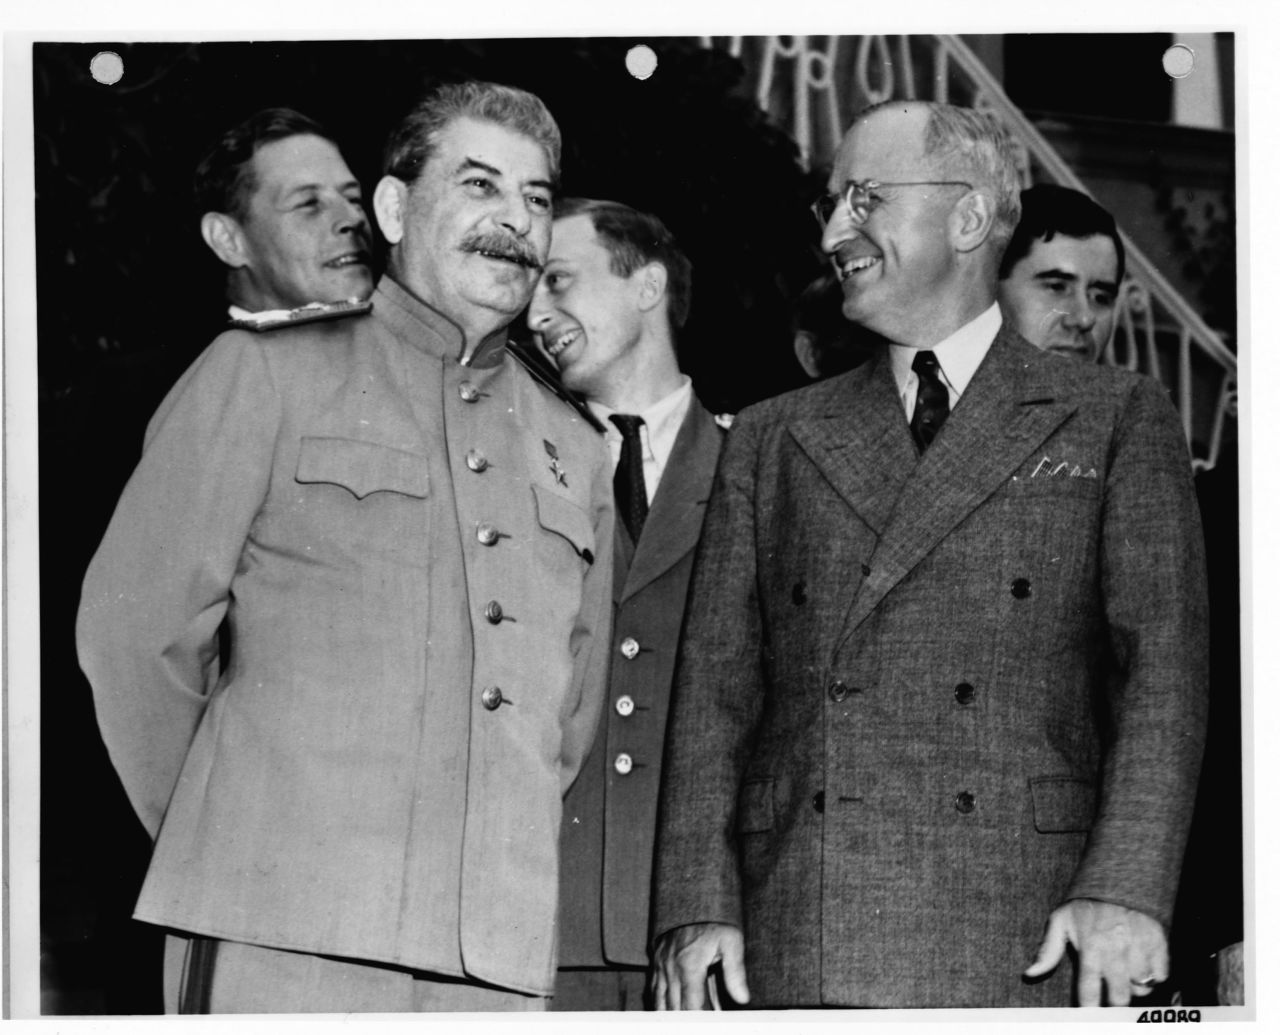 Stalin and US President Harry Truman smile during the Potsdam Conference in Germany in 1945. The Germans had recently surrendered, and Japan's surrender was soon to follow. At the end of the conference, the Potsdam Declaration issued an ultimatum to Japan, saying it should surrender or face "prompt and utter destruction." Less than two weeks later, the first atomic bomb was dropped on Hiroshima.